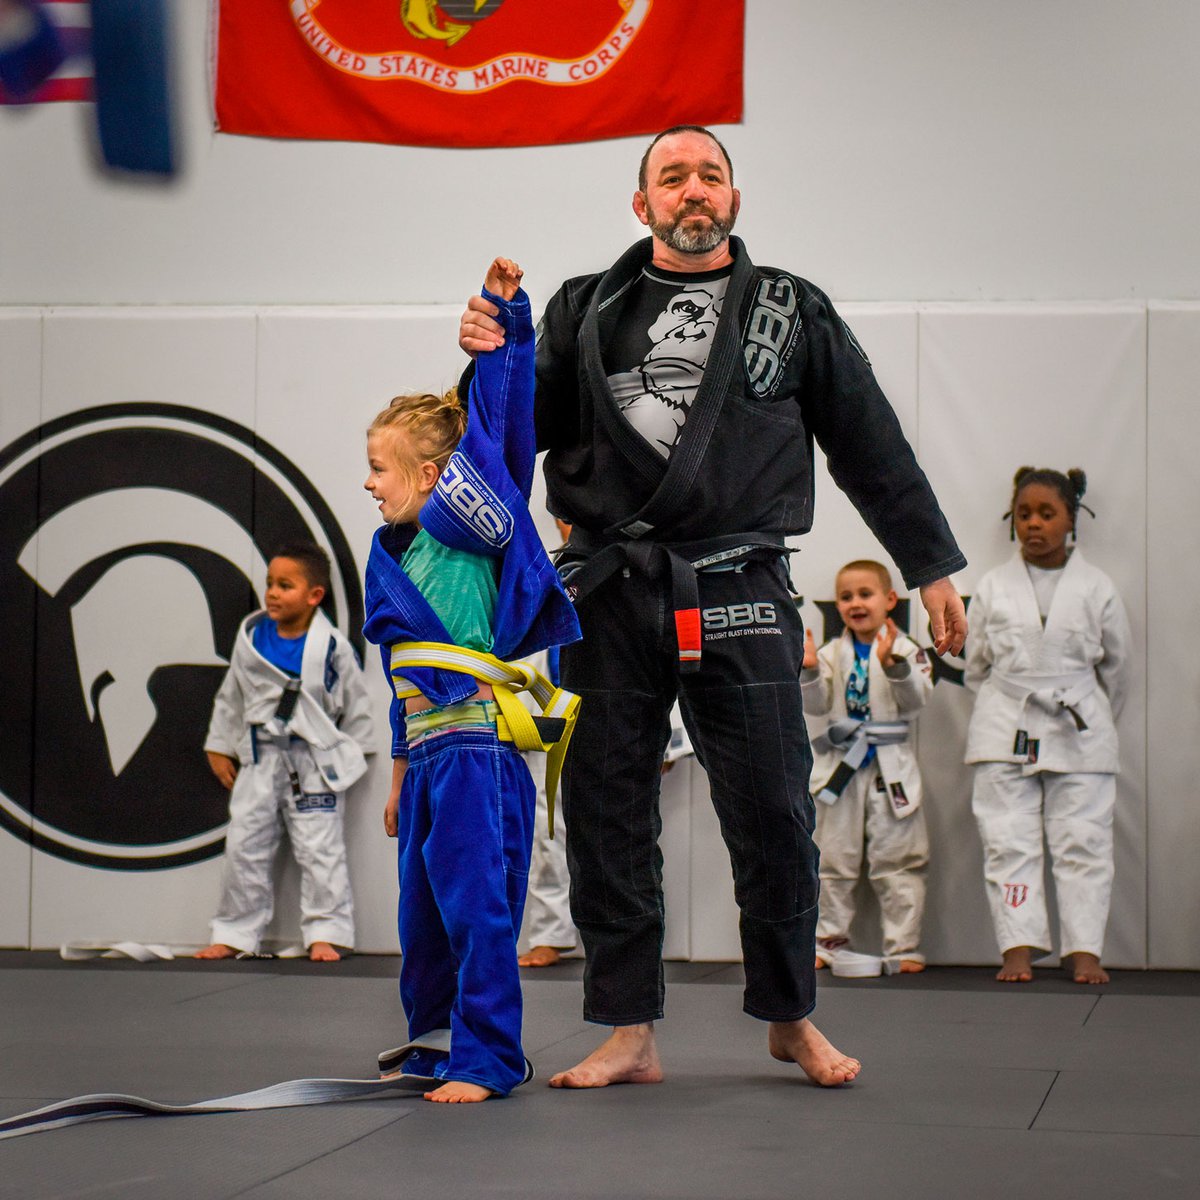 Growth through adversity: Longtime martial artist planning 2nd location for Spartan Fitness